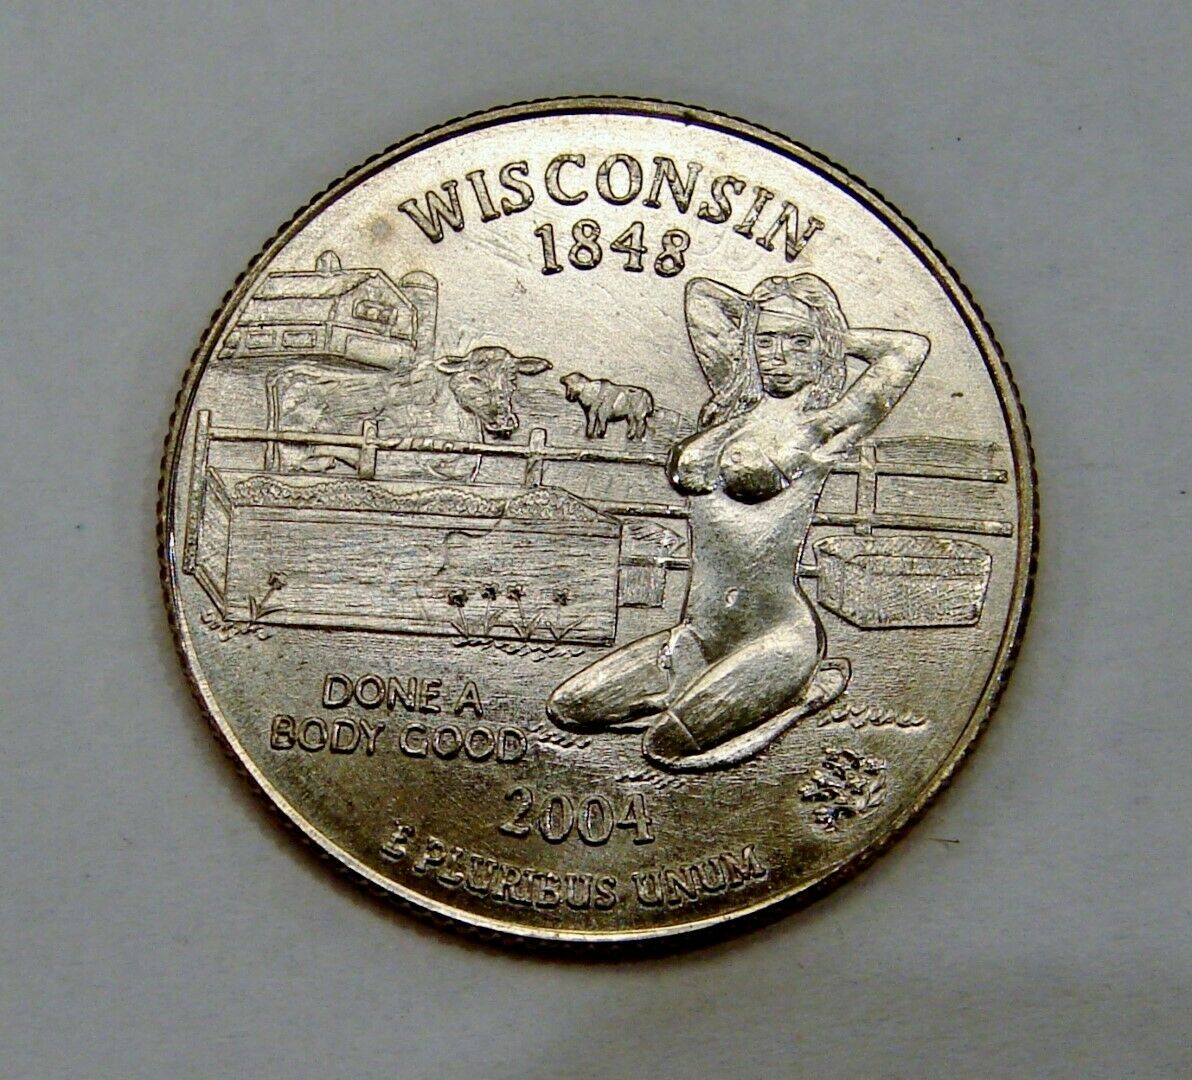 Wisconsin - Done A Body Good - Adult Themed "sexy Quarter"